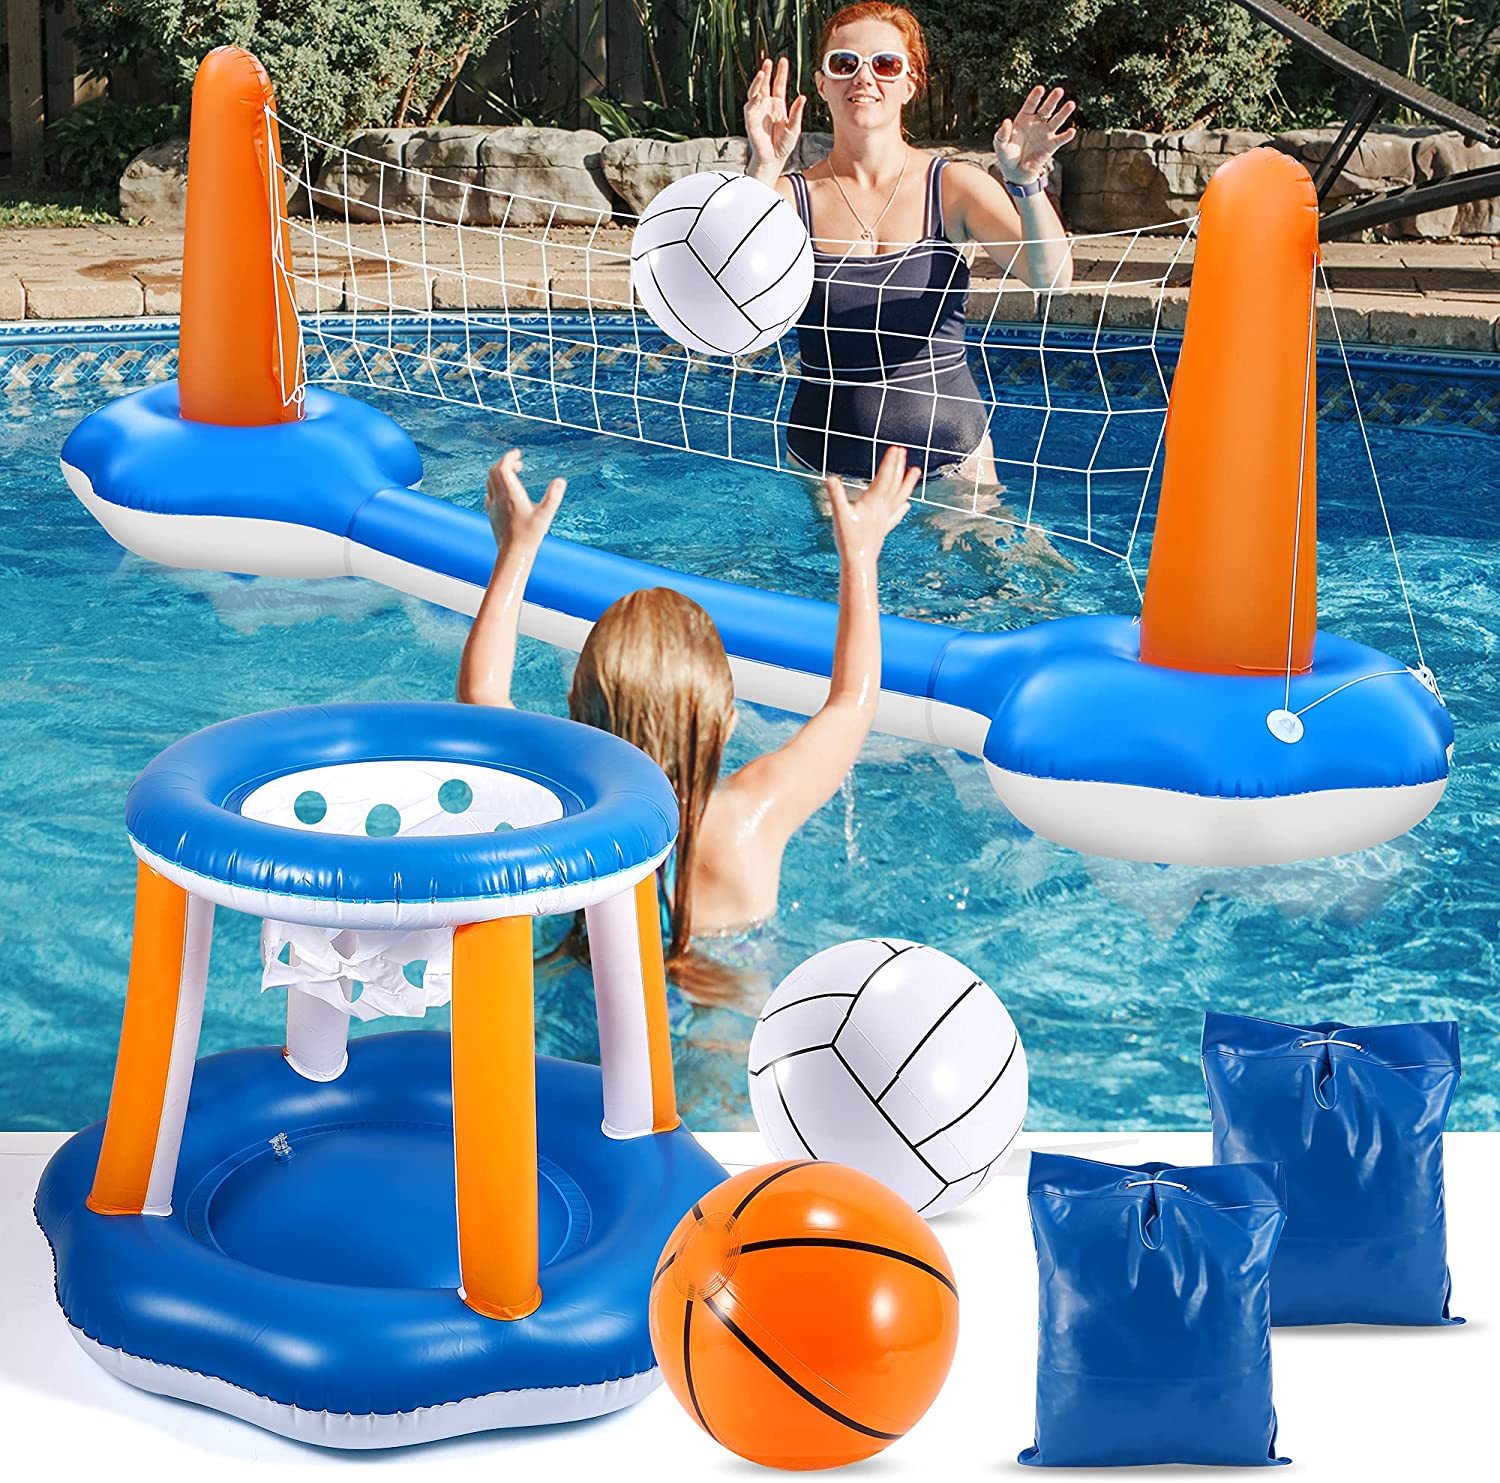 ''FiGoal Inflatable Pool Float Set VOLLEYBALL Net & Basketball Hoops Outdoor Decorations, Pool Essent